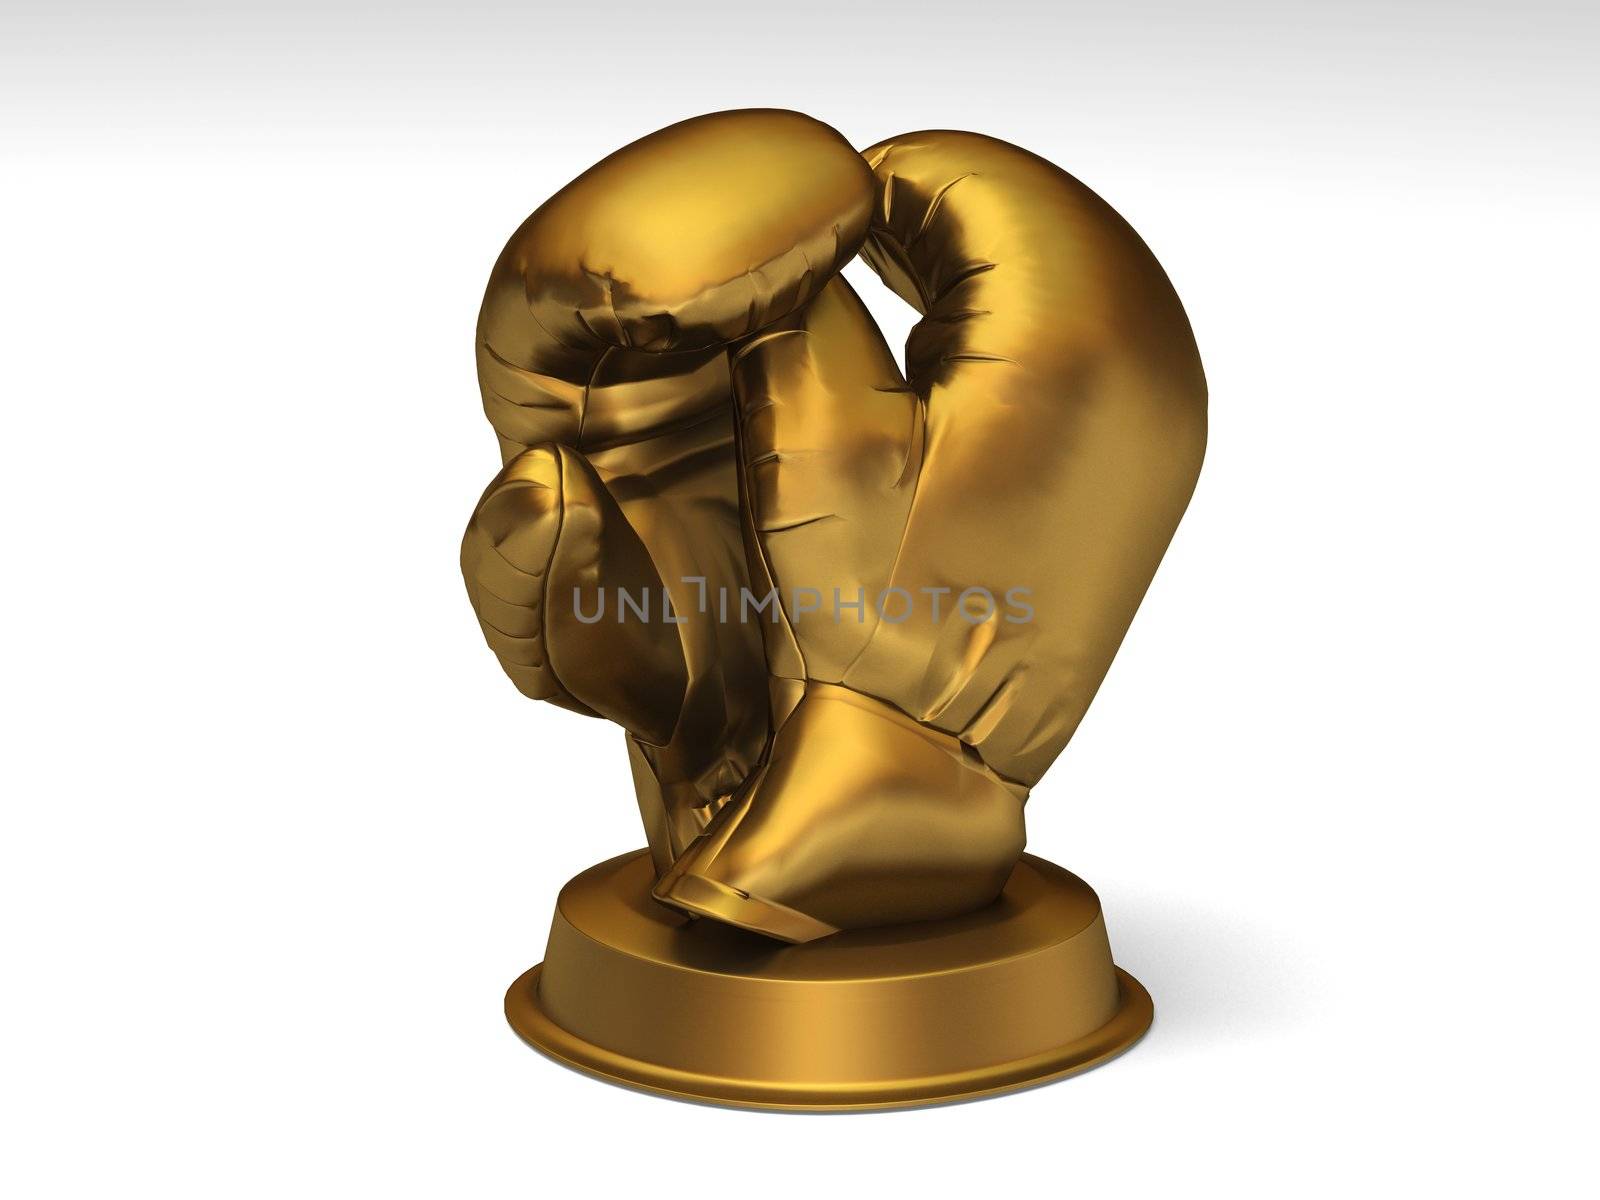 Golden boxing trophy by shkyo30